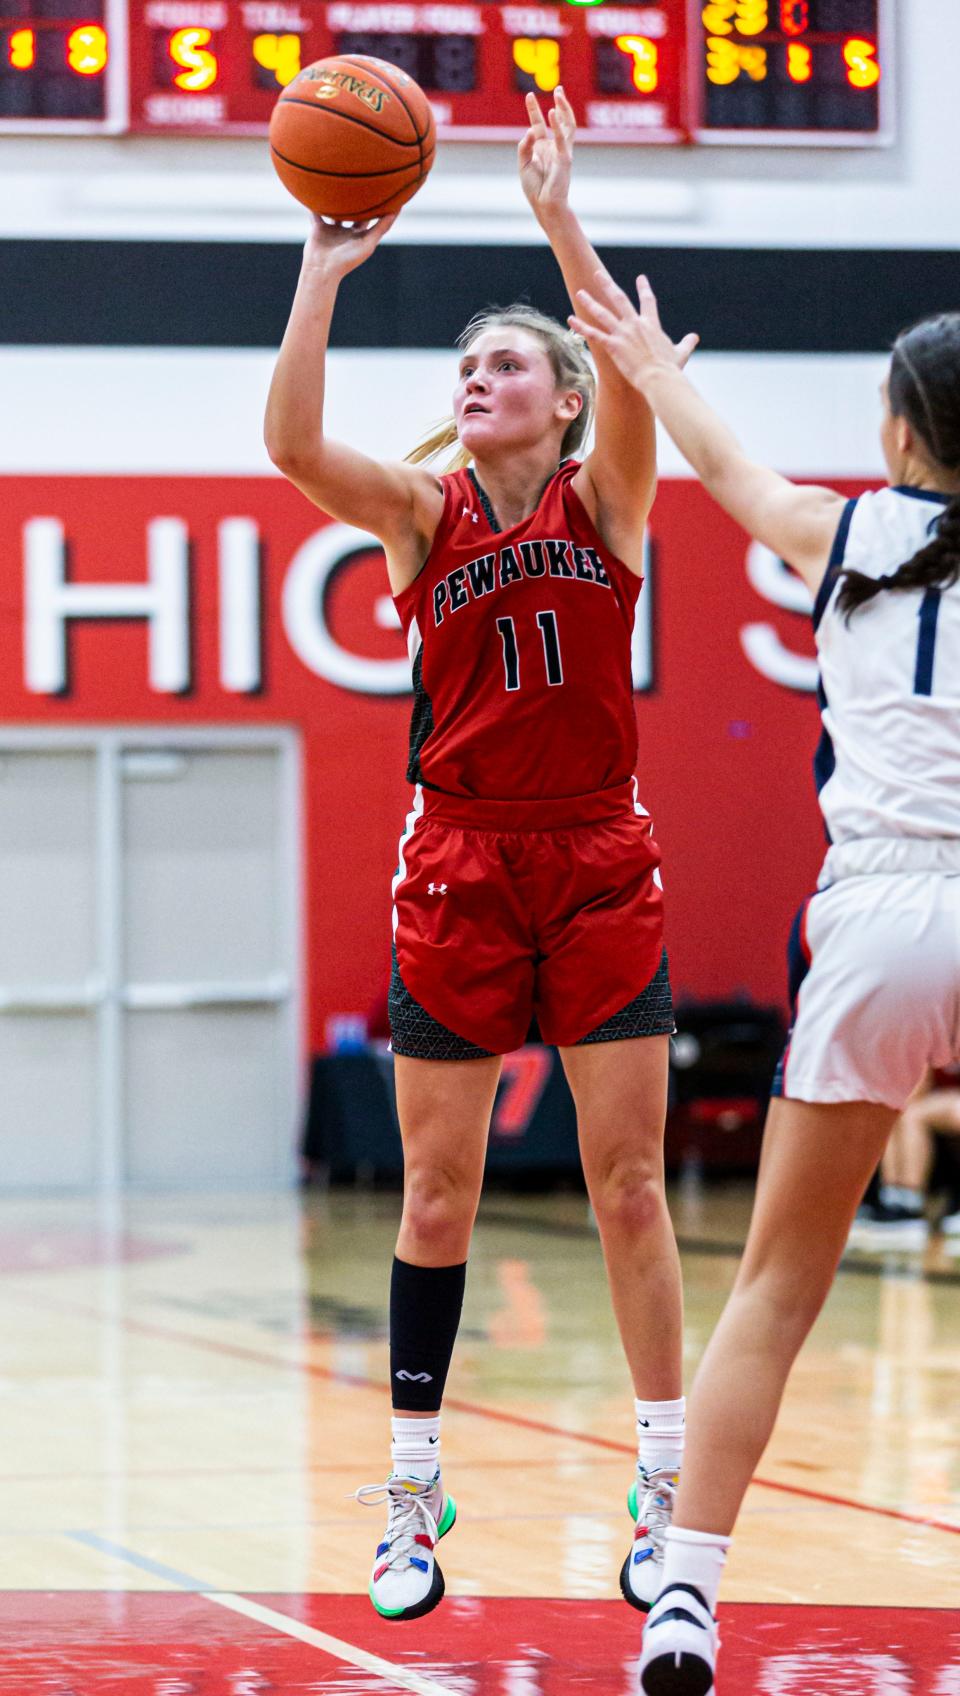 Pewaukee's Sarah Newcomer (11) elevates for a shot during the game at home against Brookfield East on Tuesday, Nov. 23, 2021.